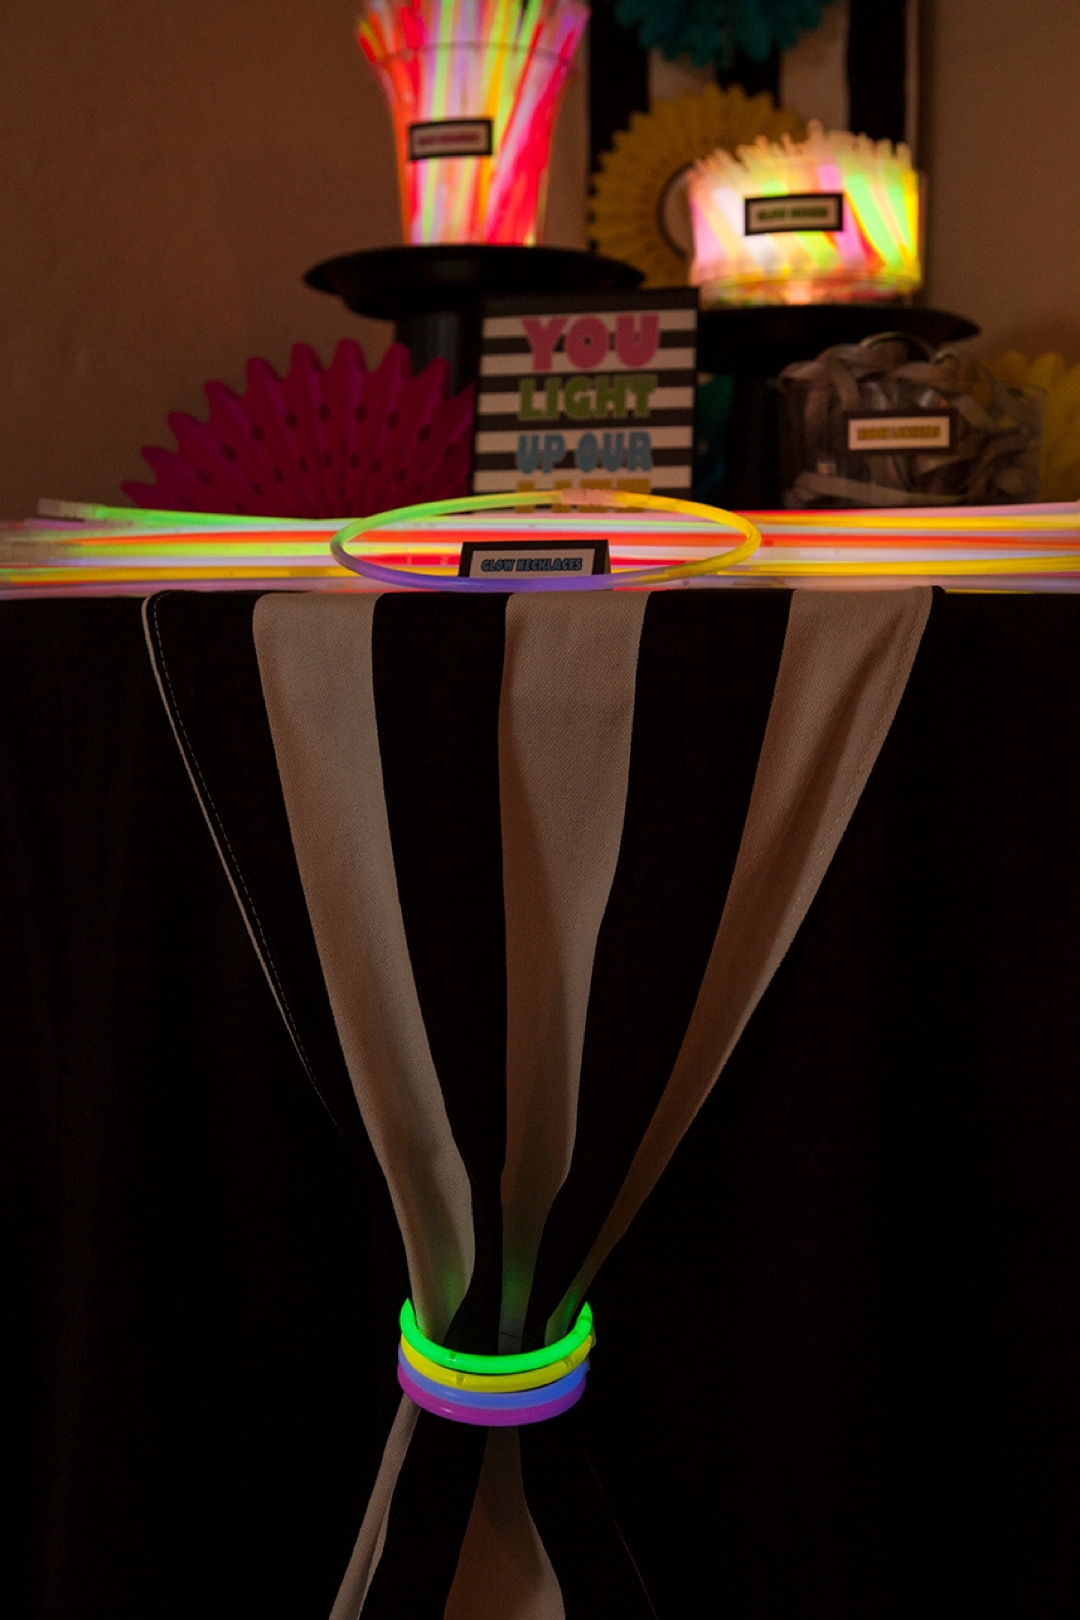 You Have To See This Awesome DIY Wedding Glow Stick Bar Idea!